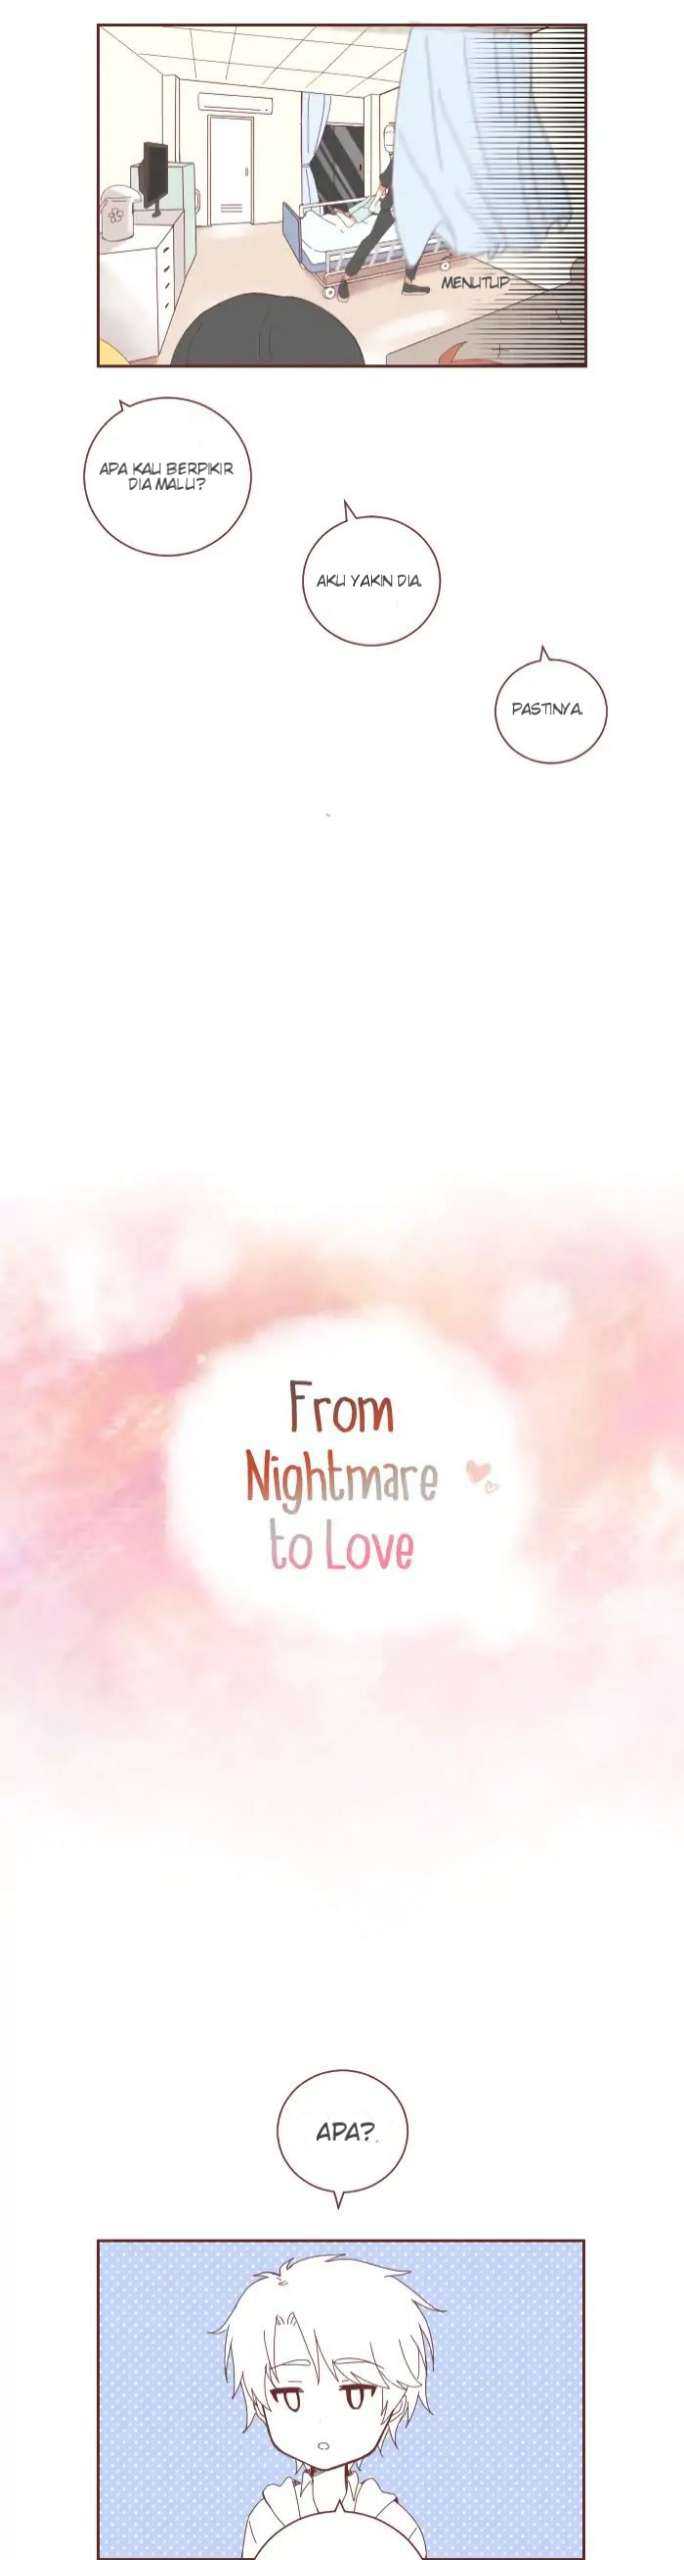 From Nightmare to Love Chapter 23 3